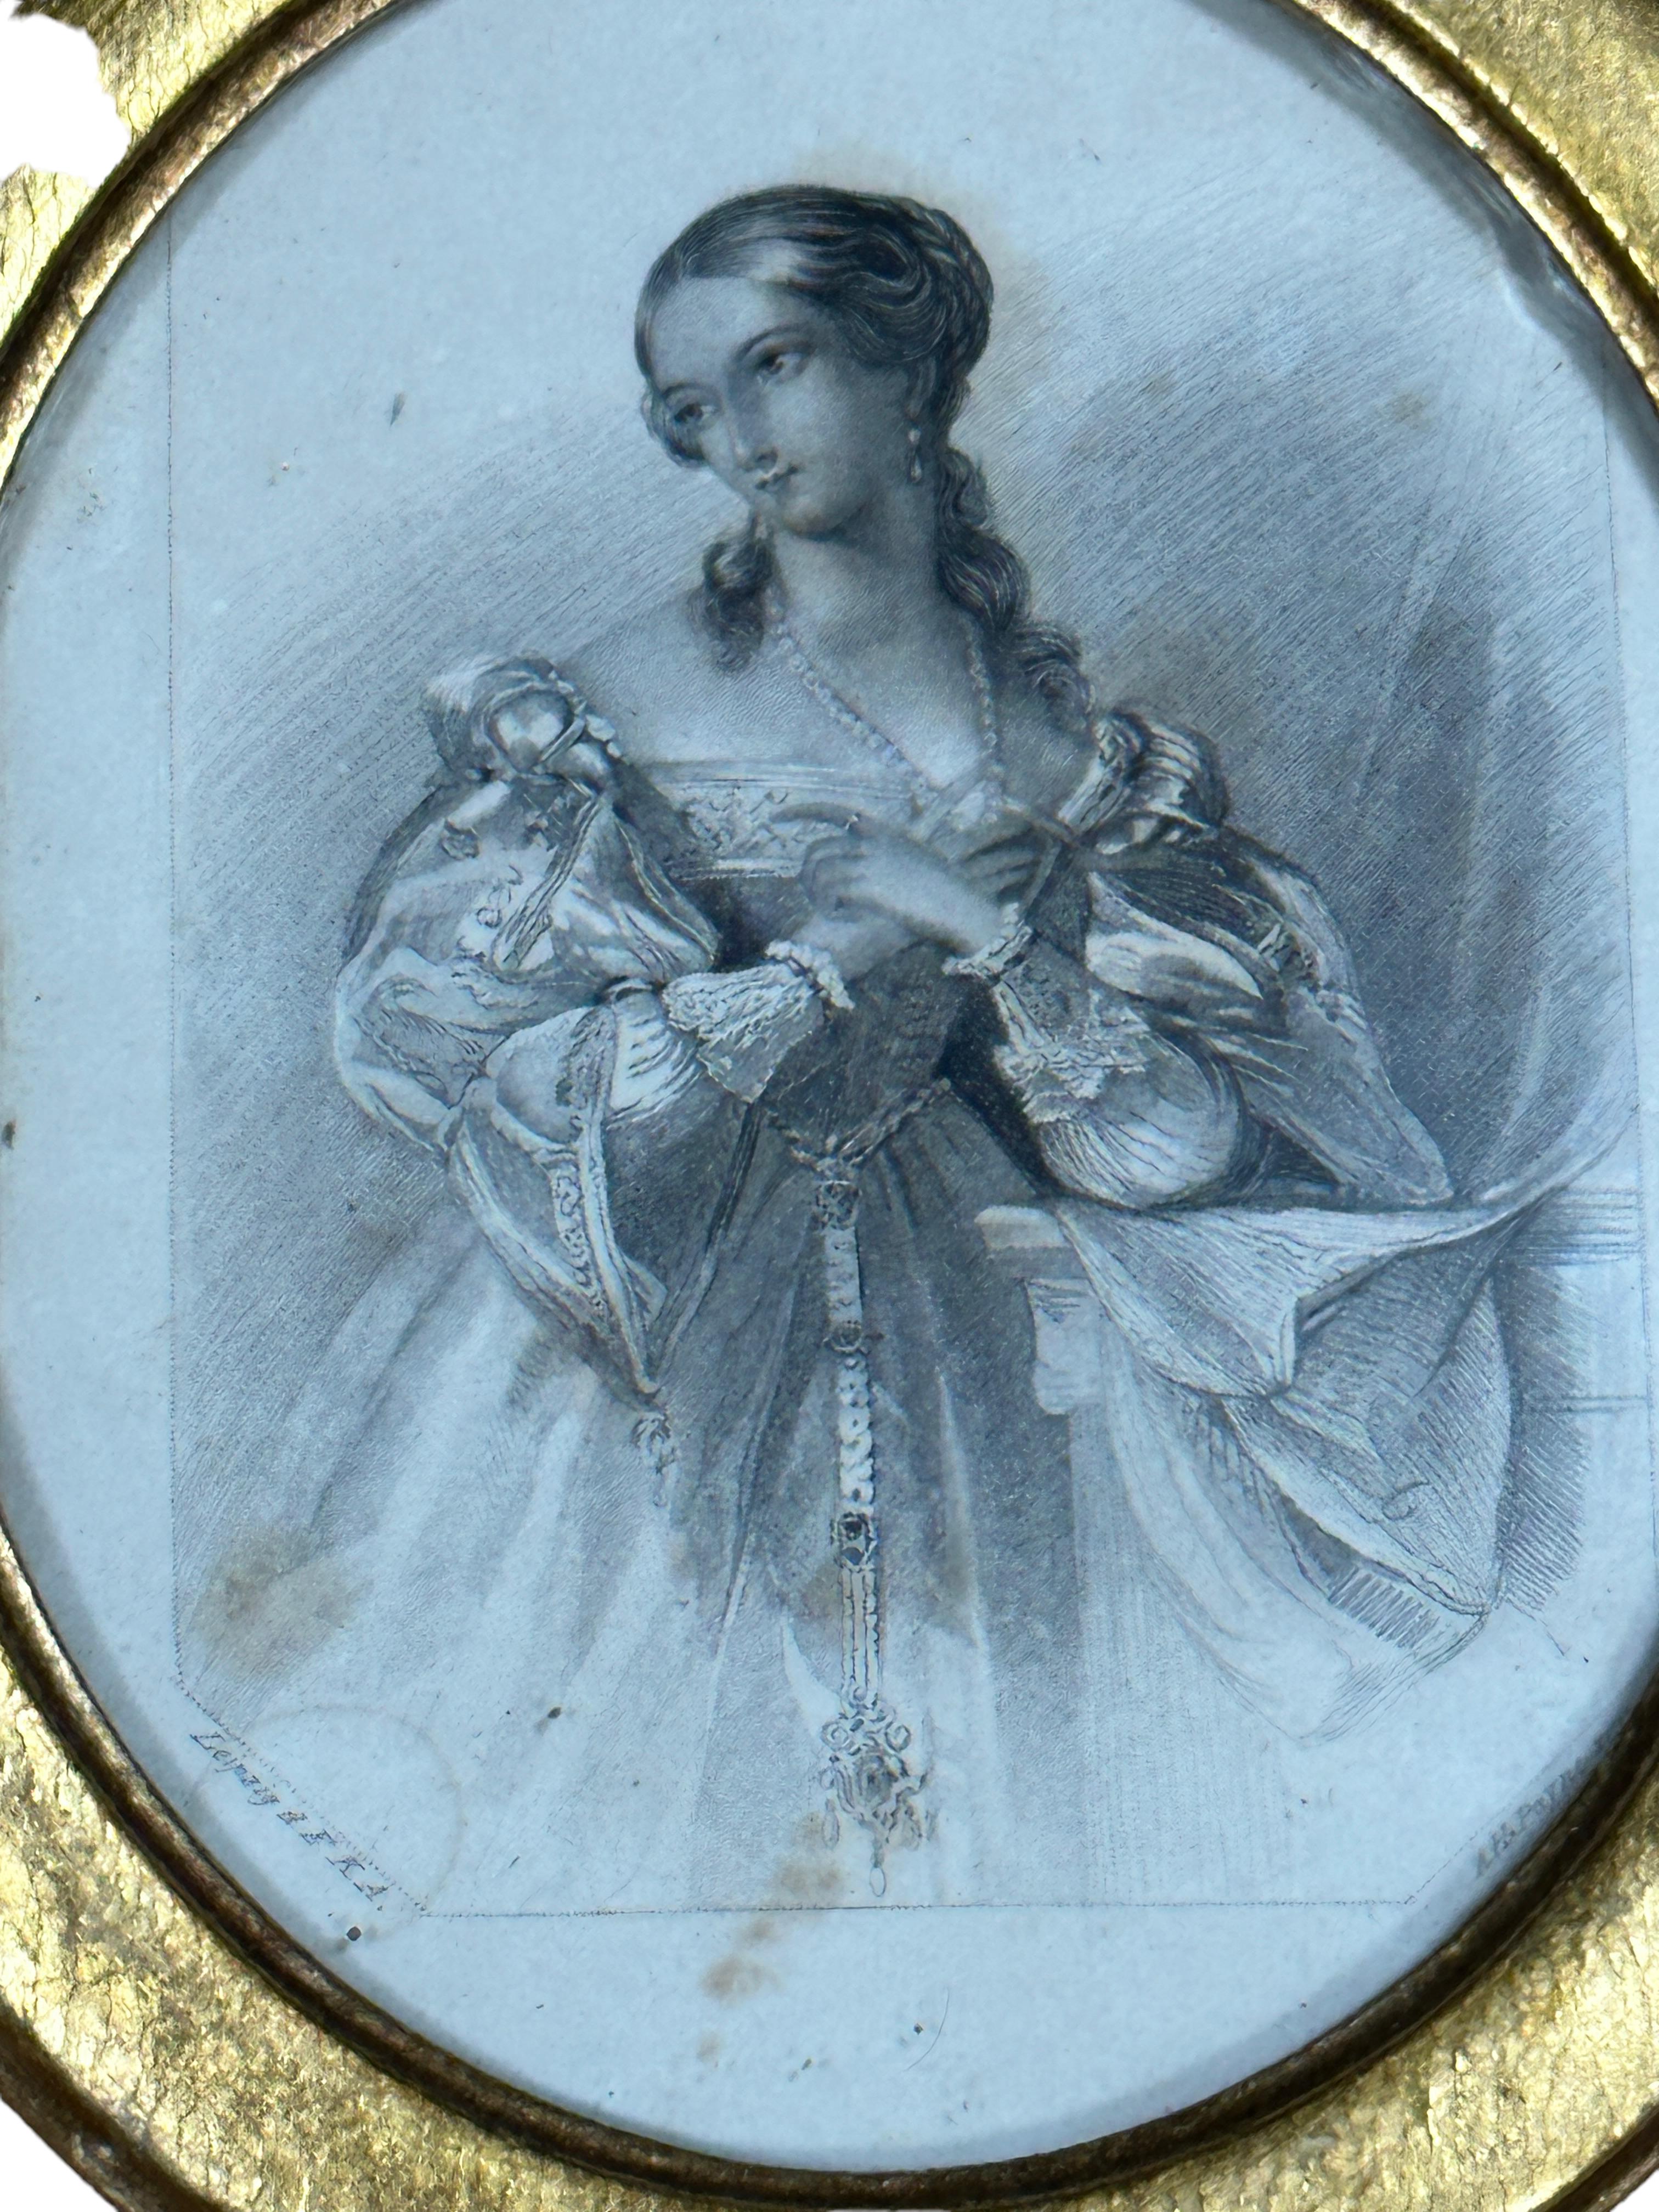 An extraordinary Original Lithograph of the a Lady. Signed by Artist.
Beautiful hand crafted gilded Biedermeier Frame. We believe it is from the 1860s.  Viewable picture size is approx. 4.38